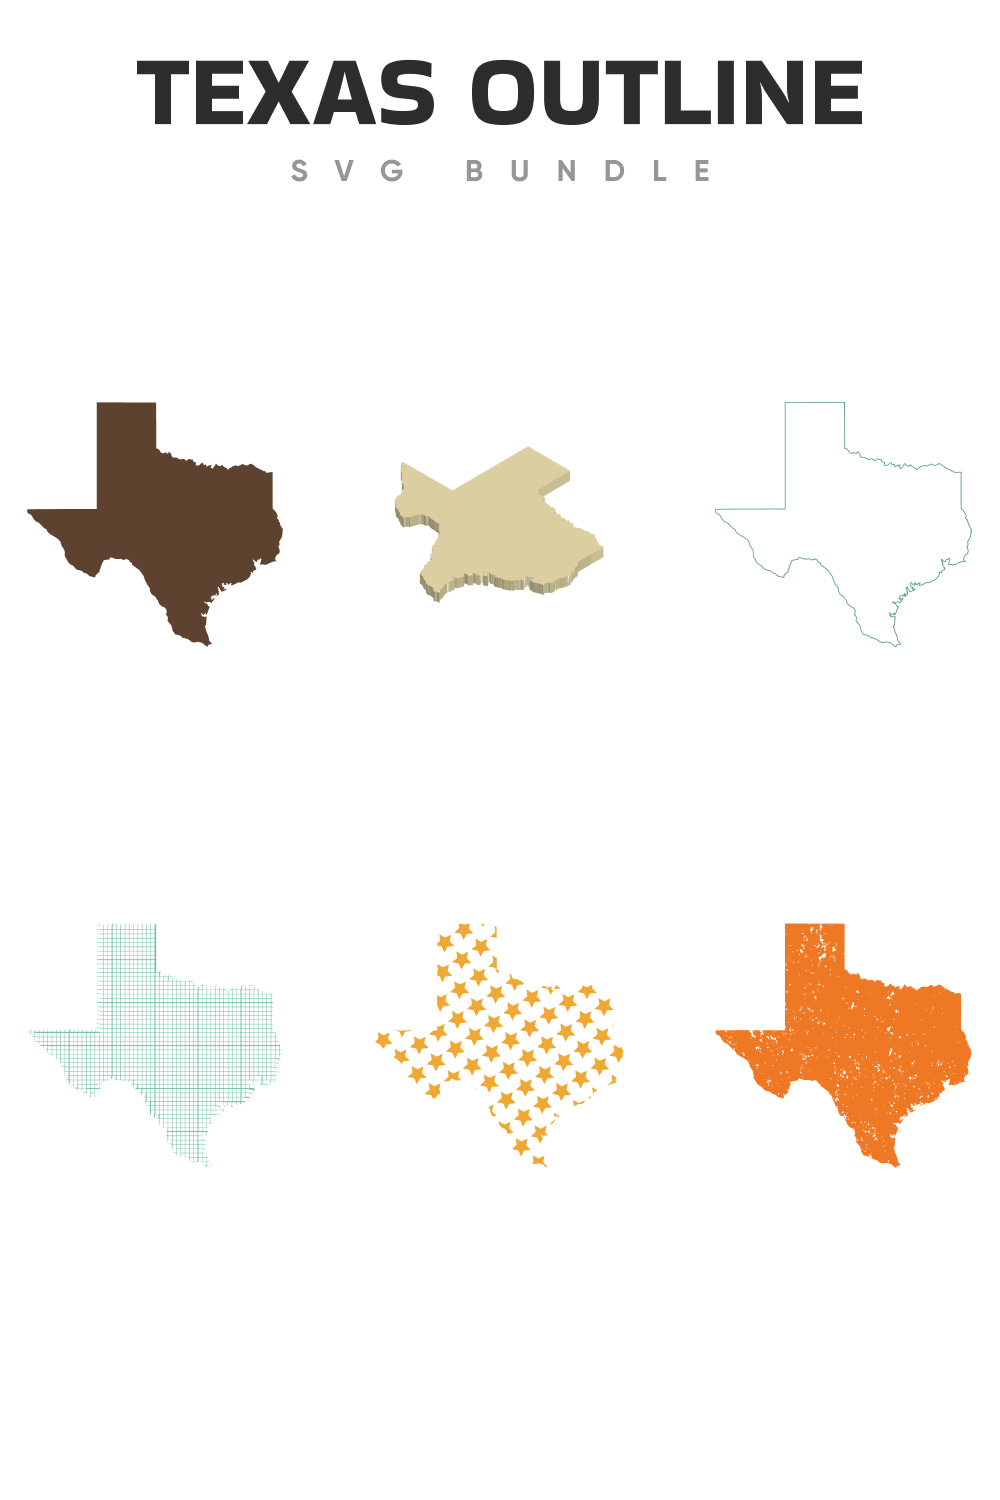 Creative texas map in outline style.